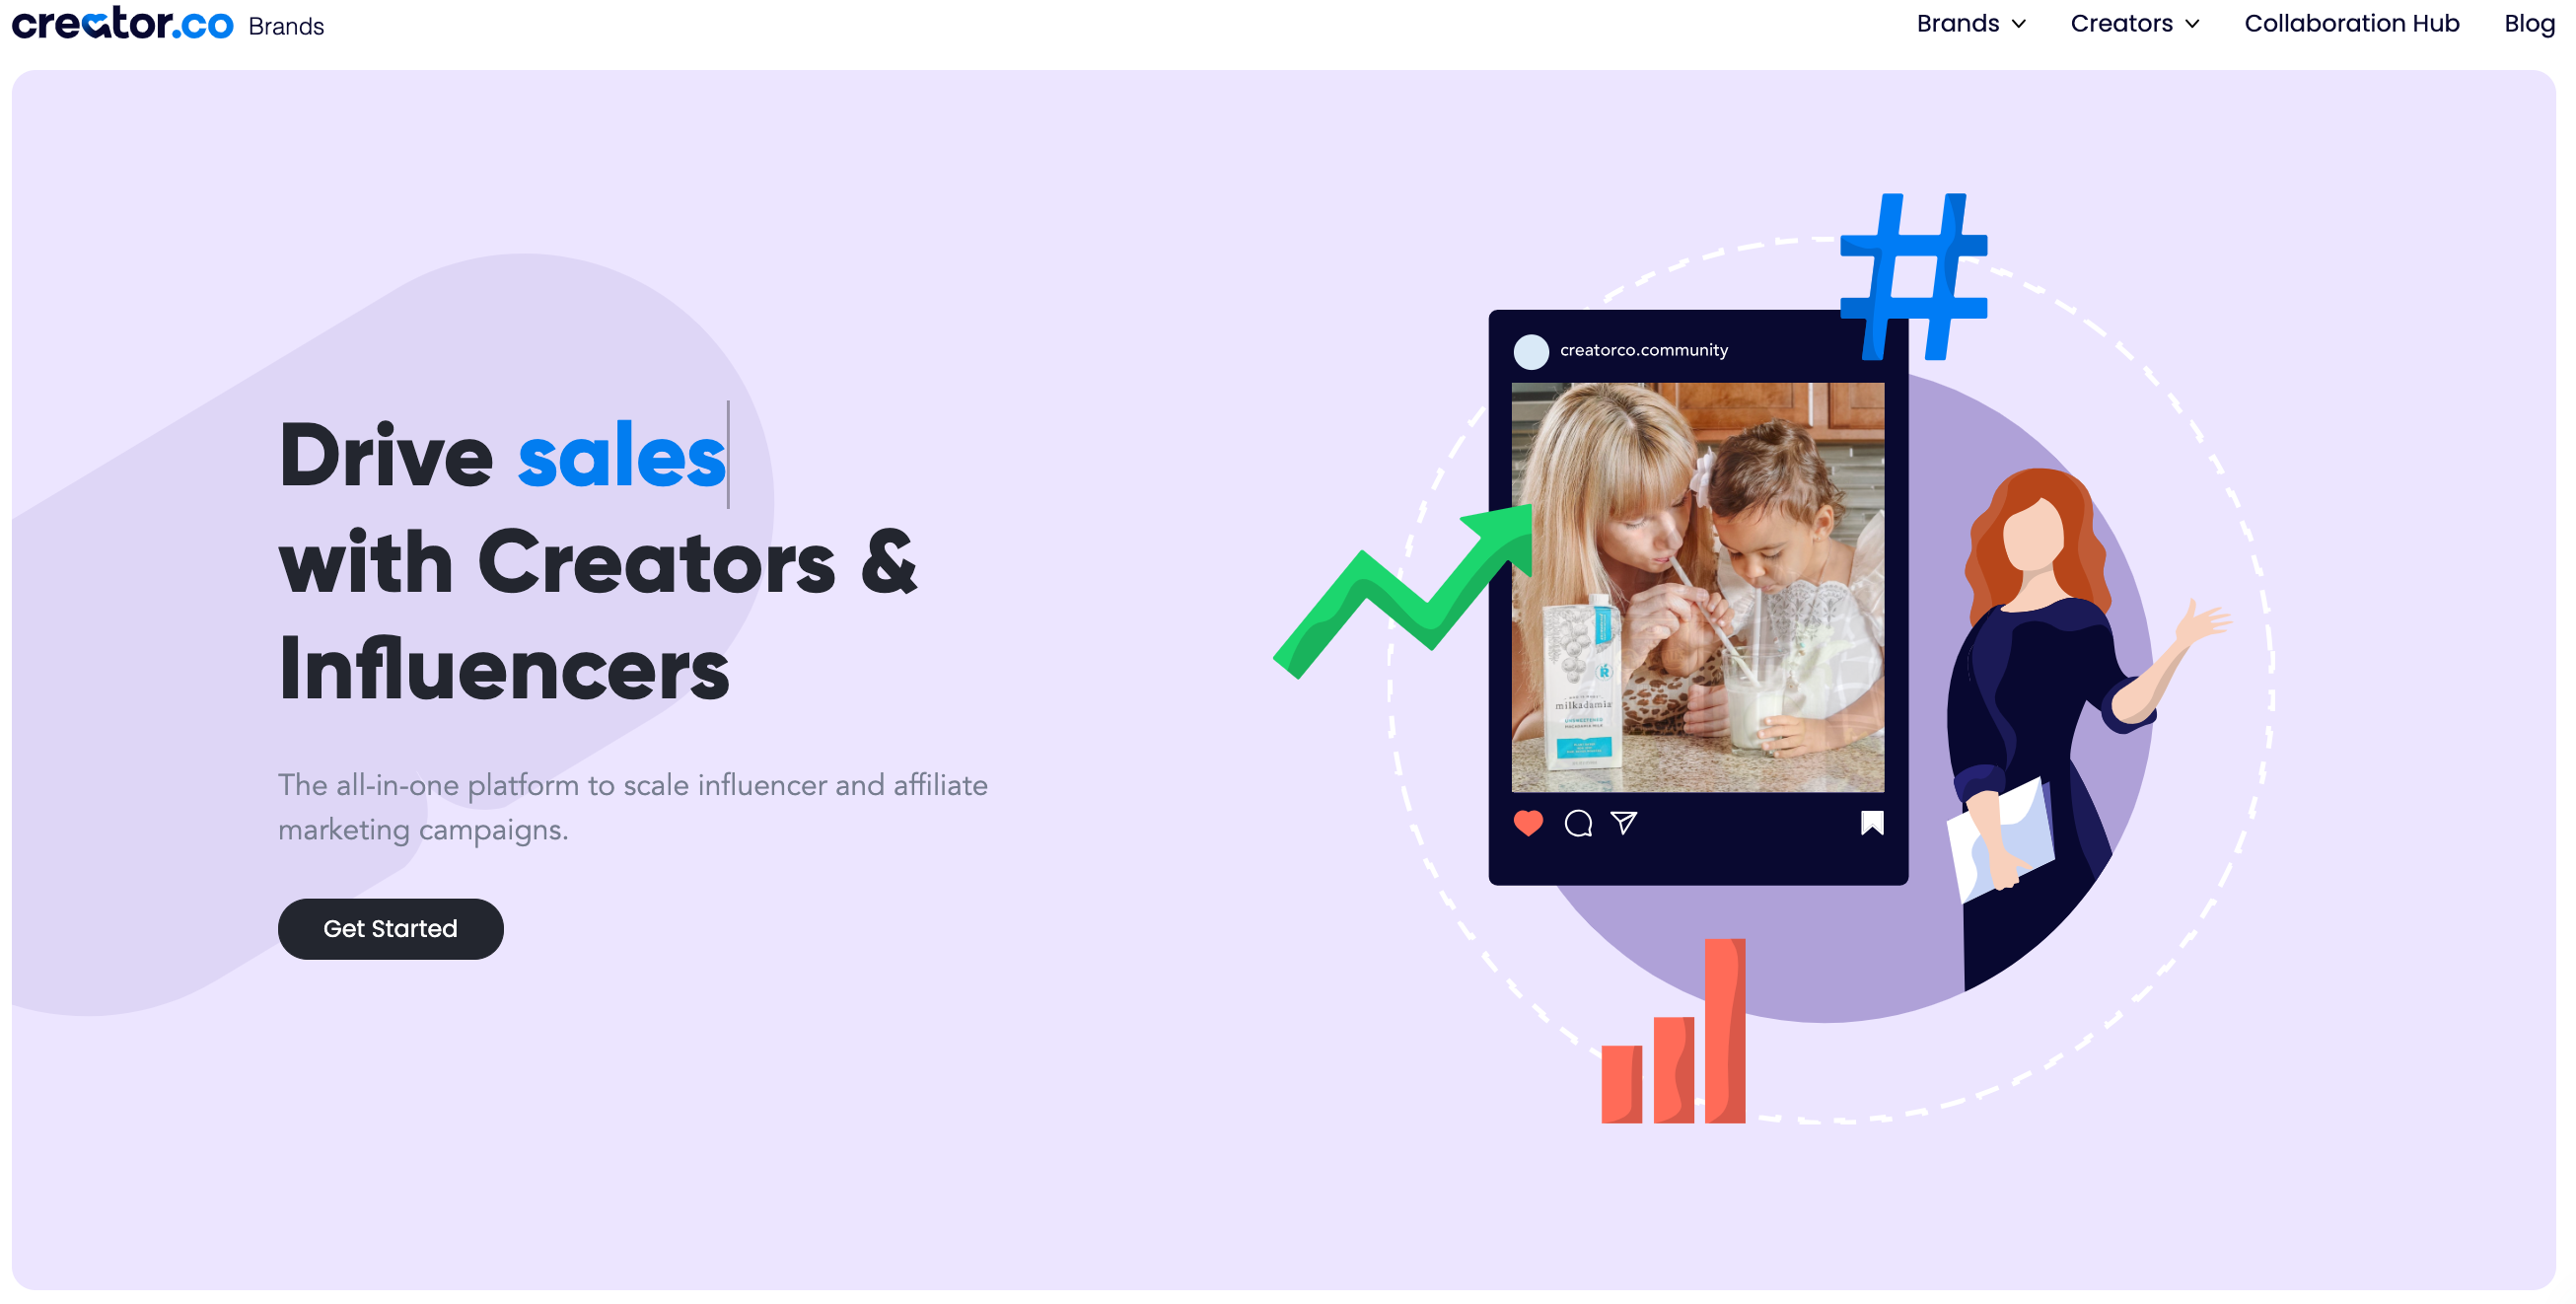 With Creator.co, brands can partner with influencers to build awareness, generate content and drive revenue.   The all-in-one platform to scale influencer and affiliate marketing campaigns.